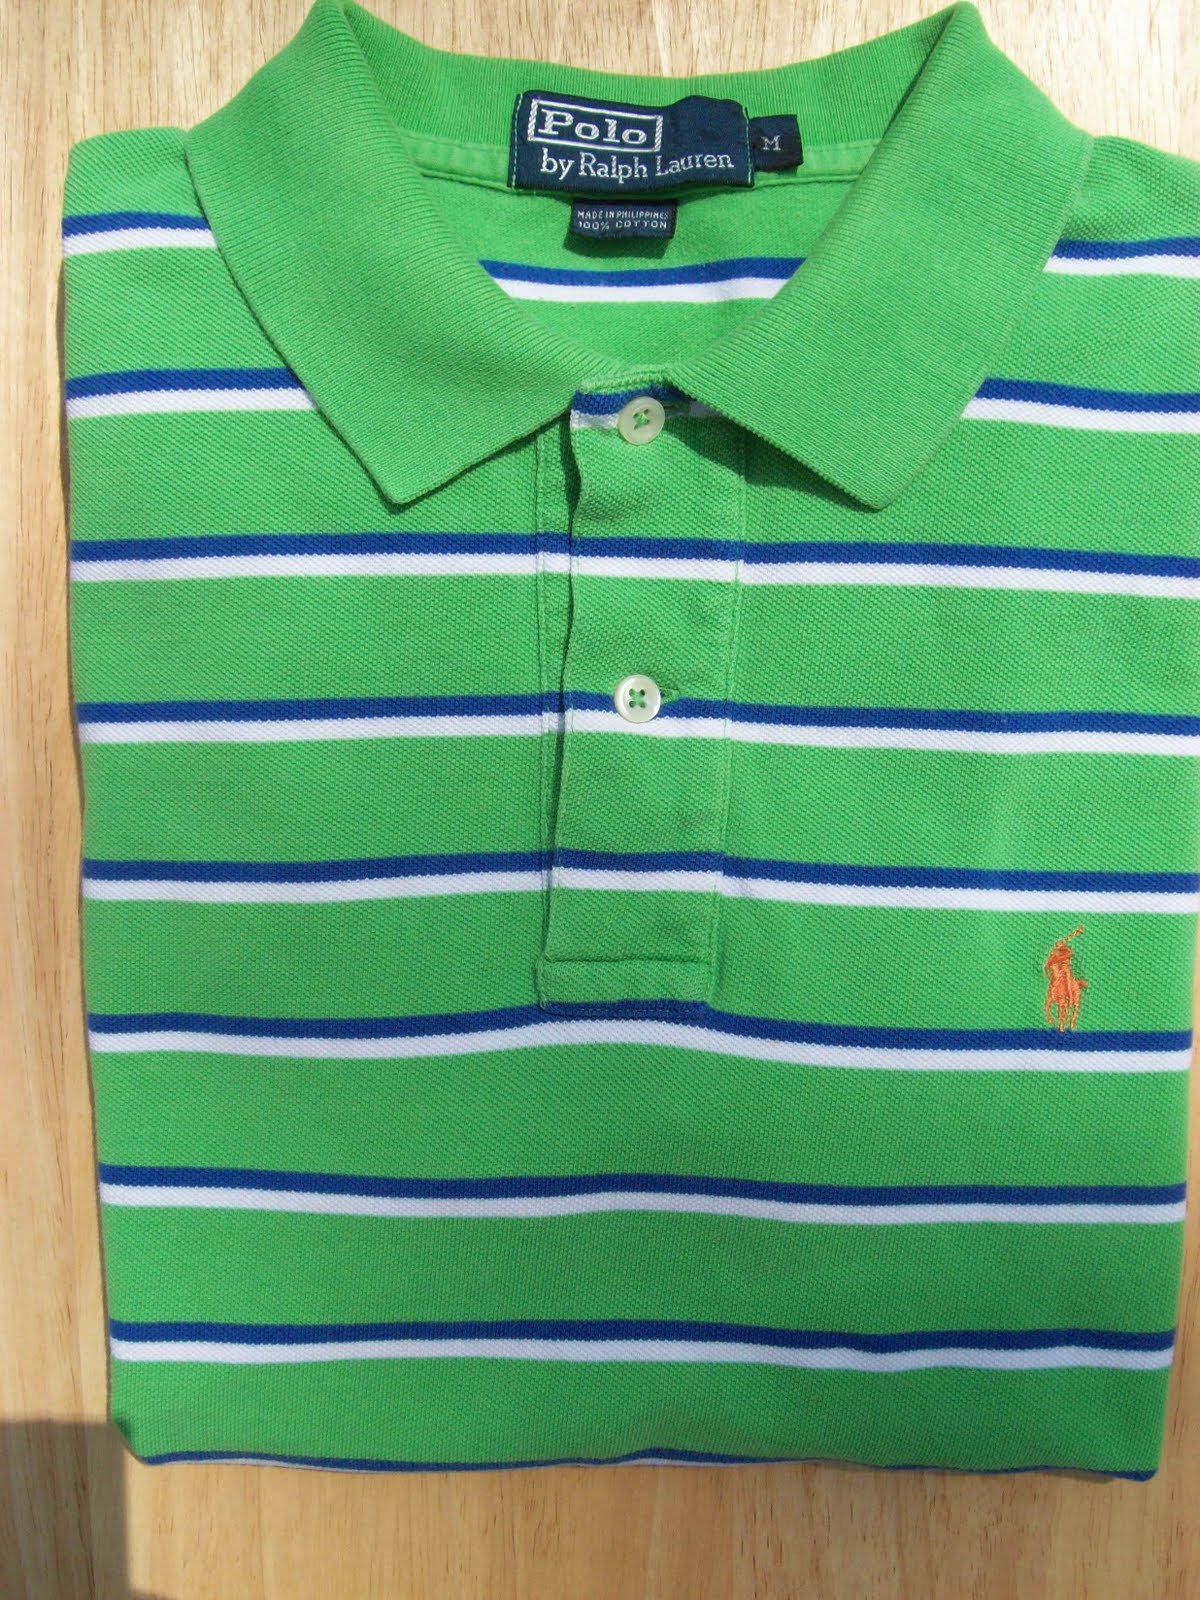 VintageMens: SOLD Polo Ralph Lauren green polo w/ blue and white stripe ...